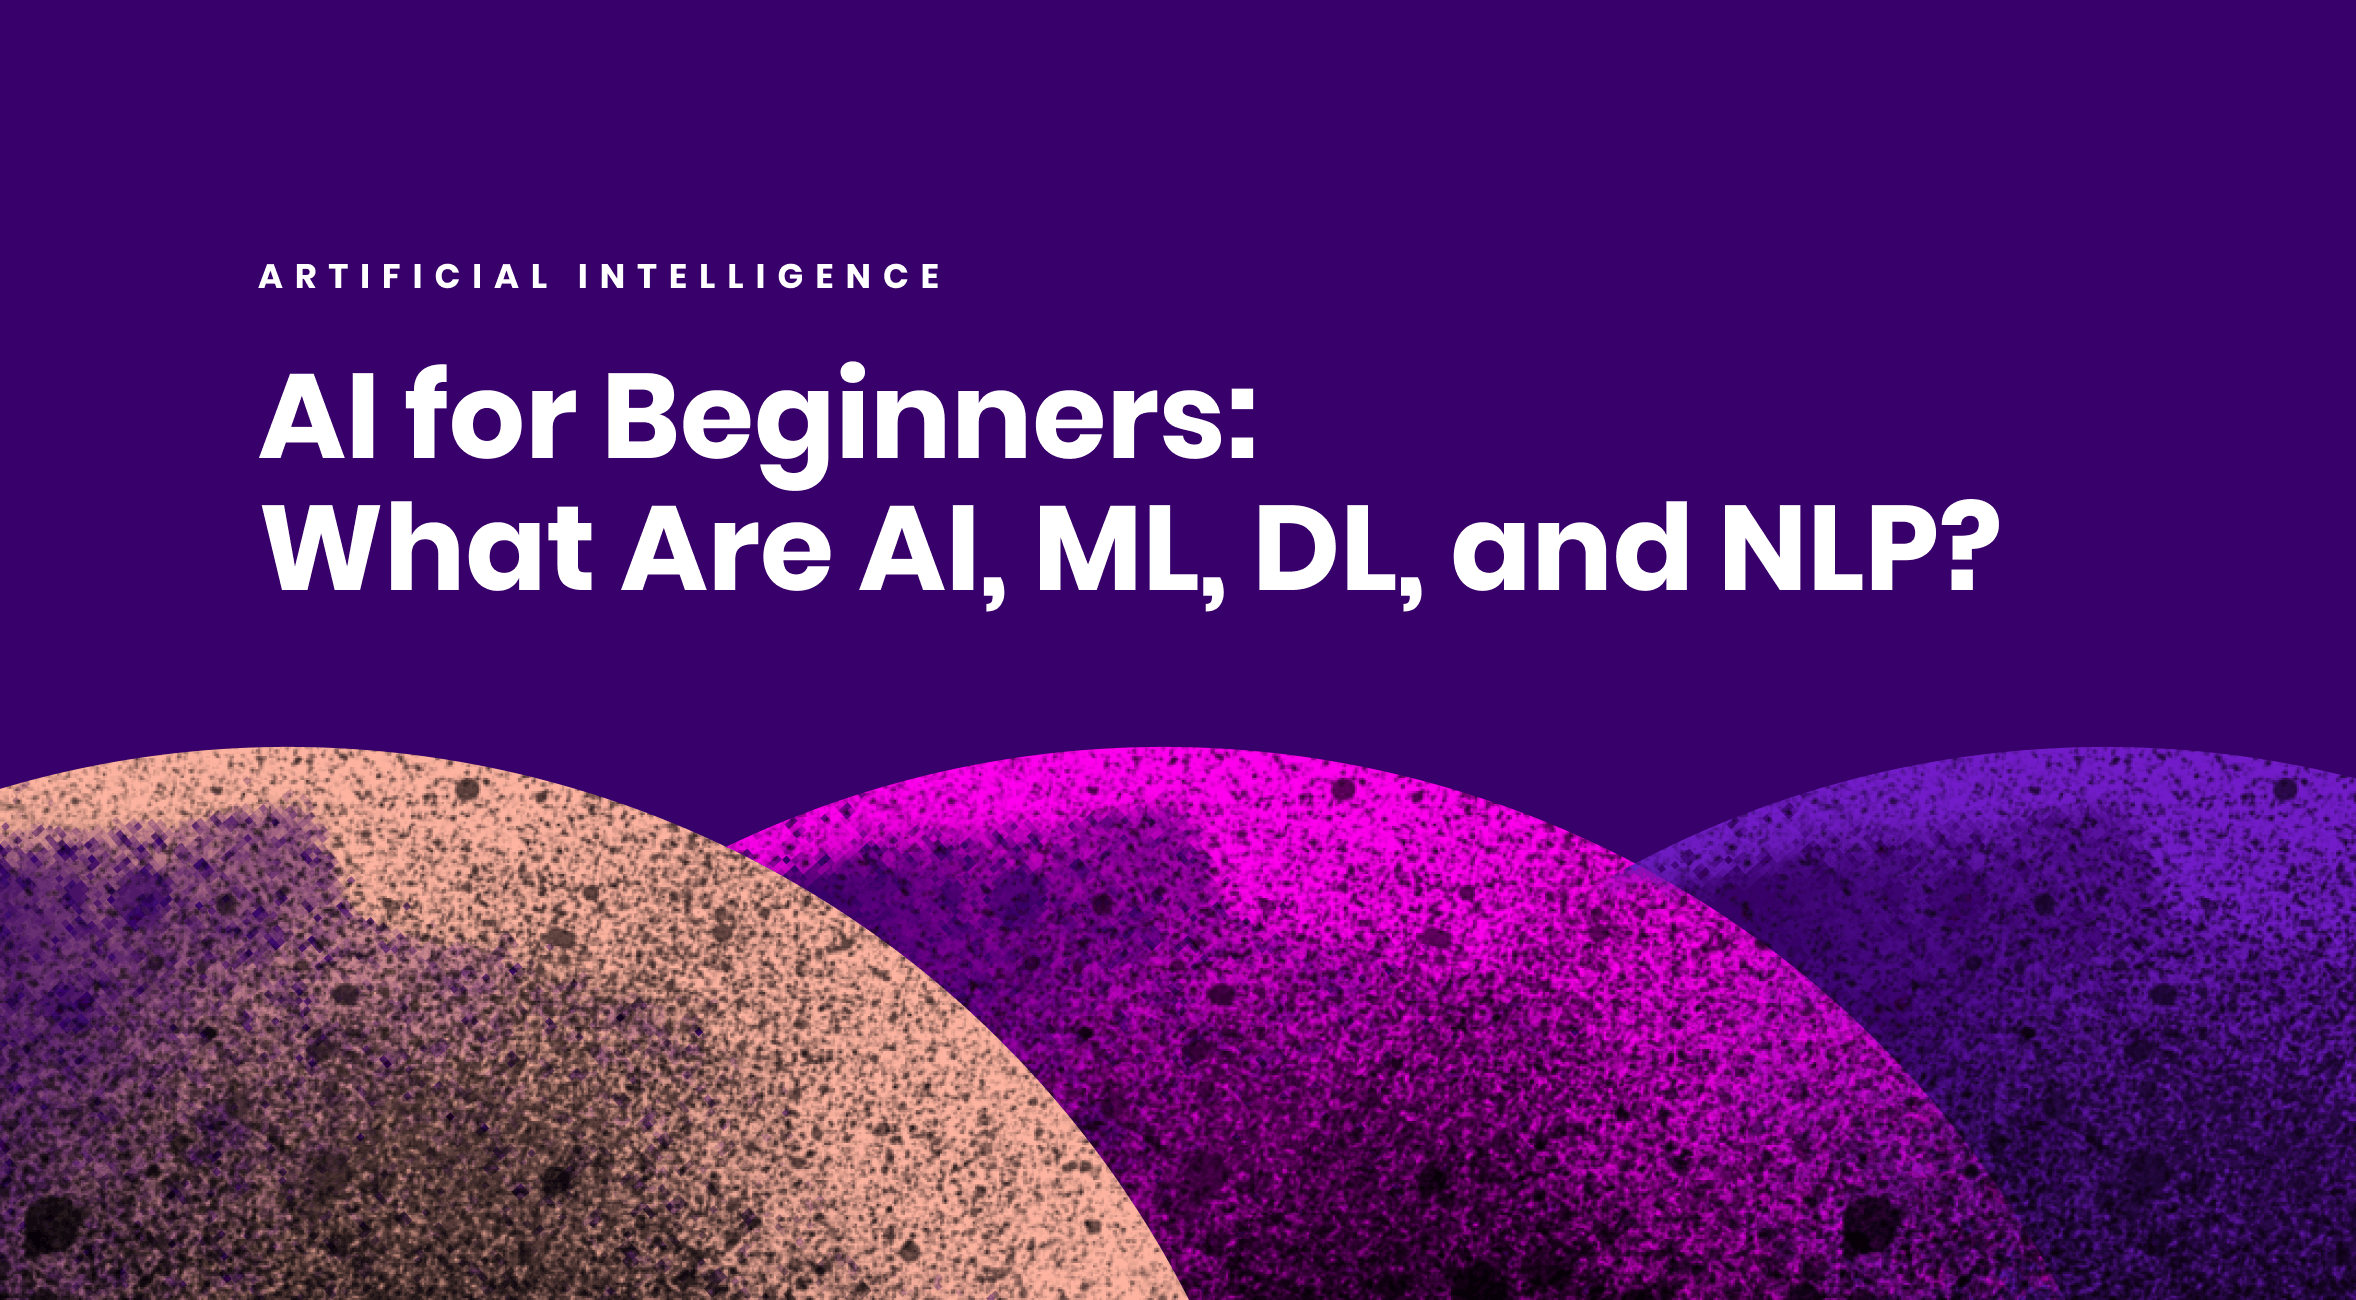 AI for beginners: What are artificial intelligence, machine learning, deep learning, and NLP?